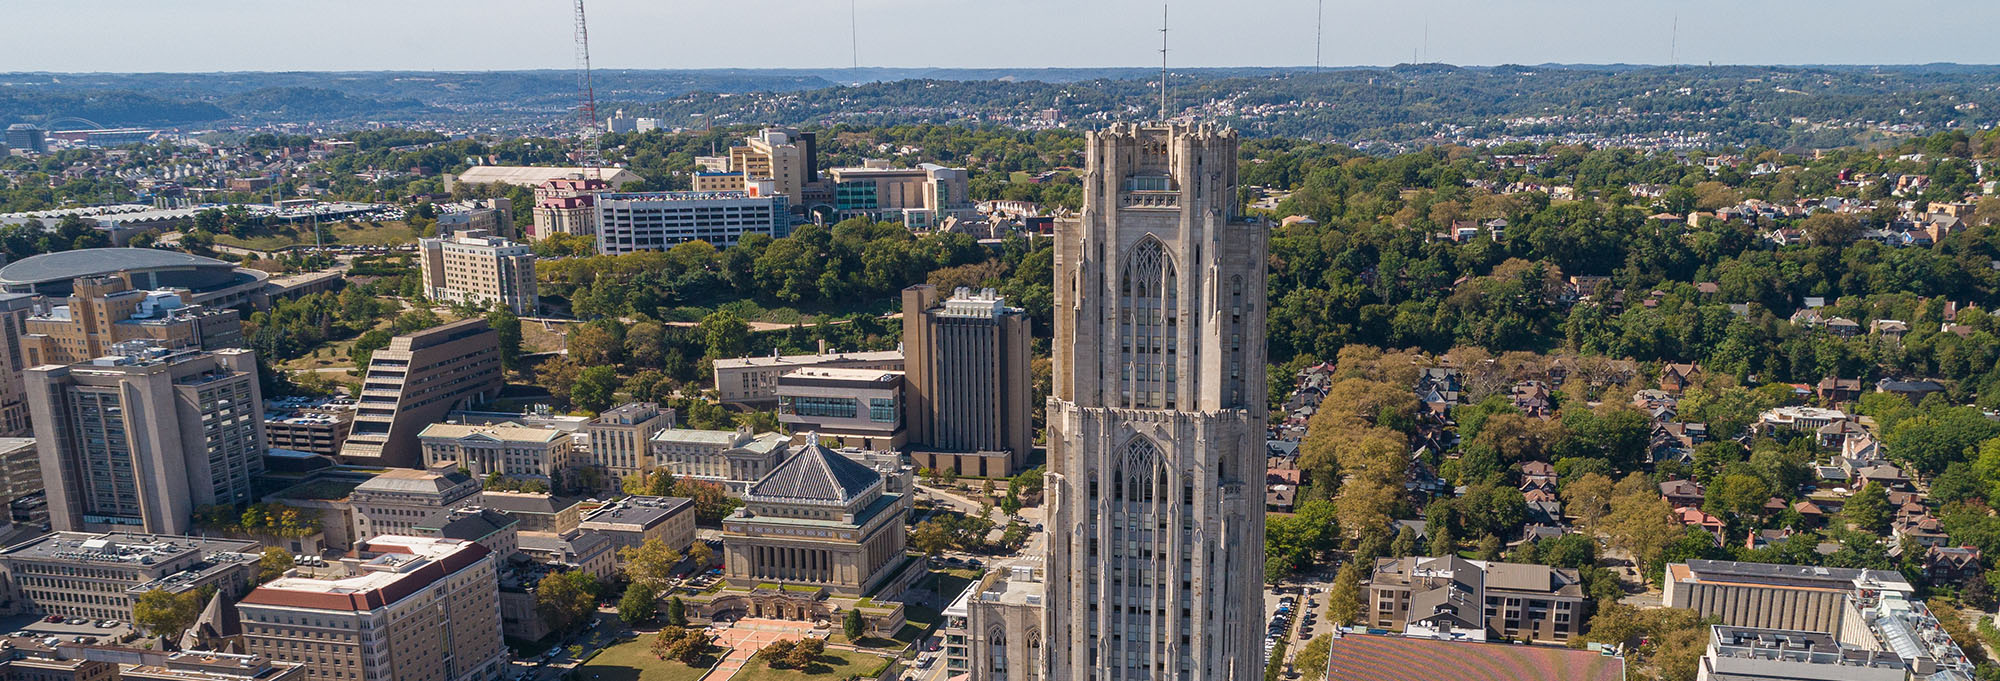 Aerial view of the University of Pittsburgh’s main campus